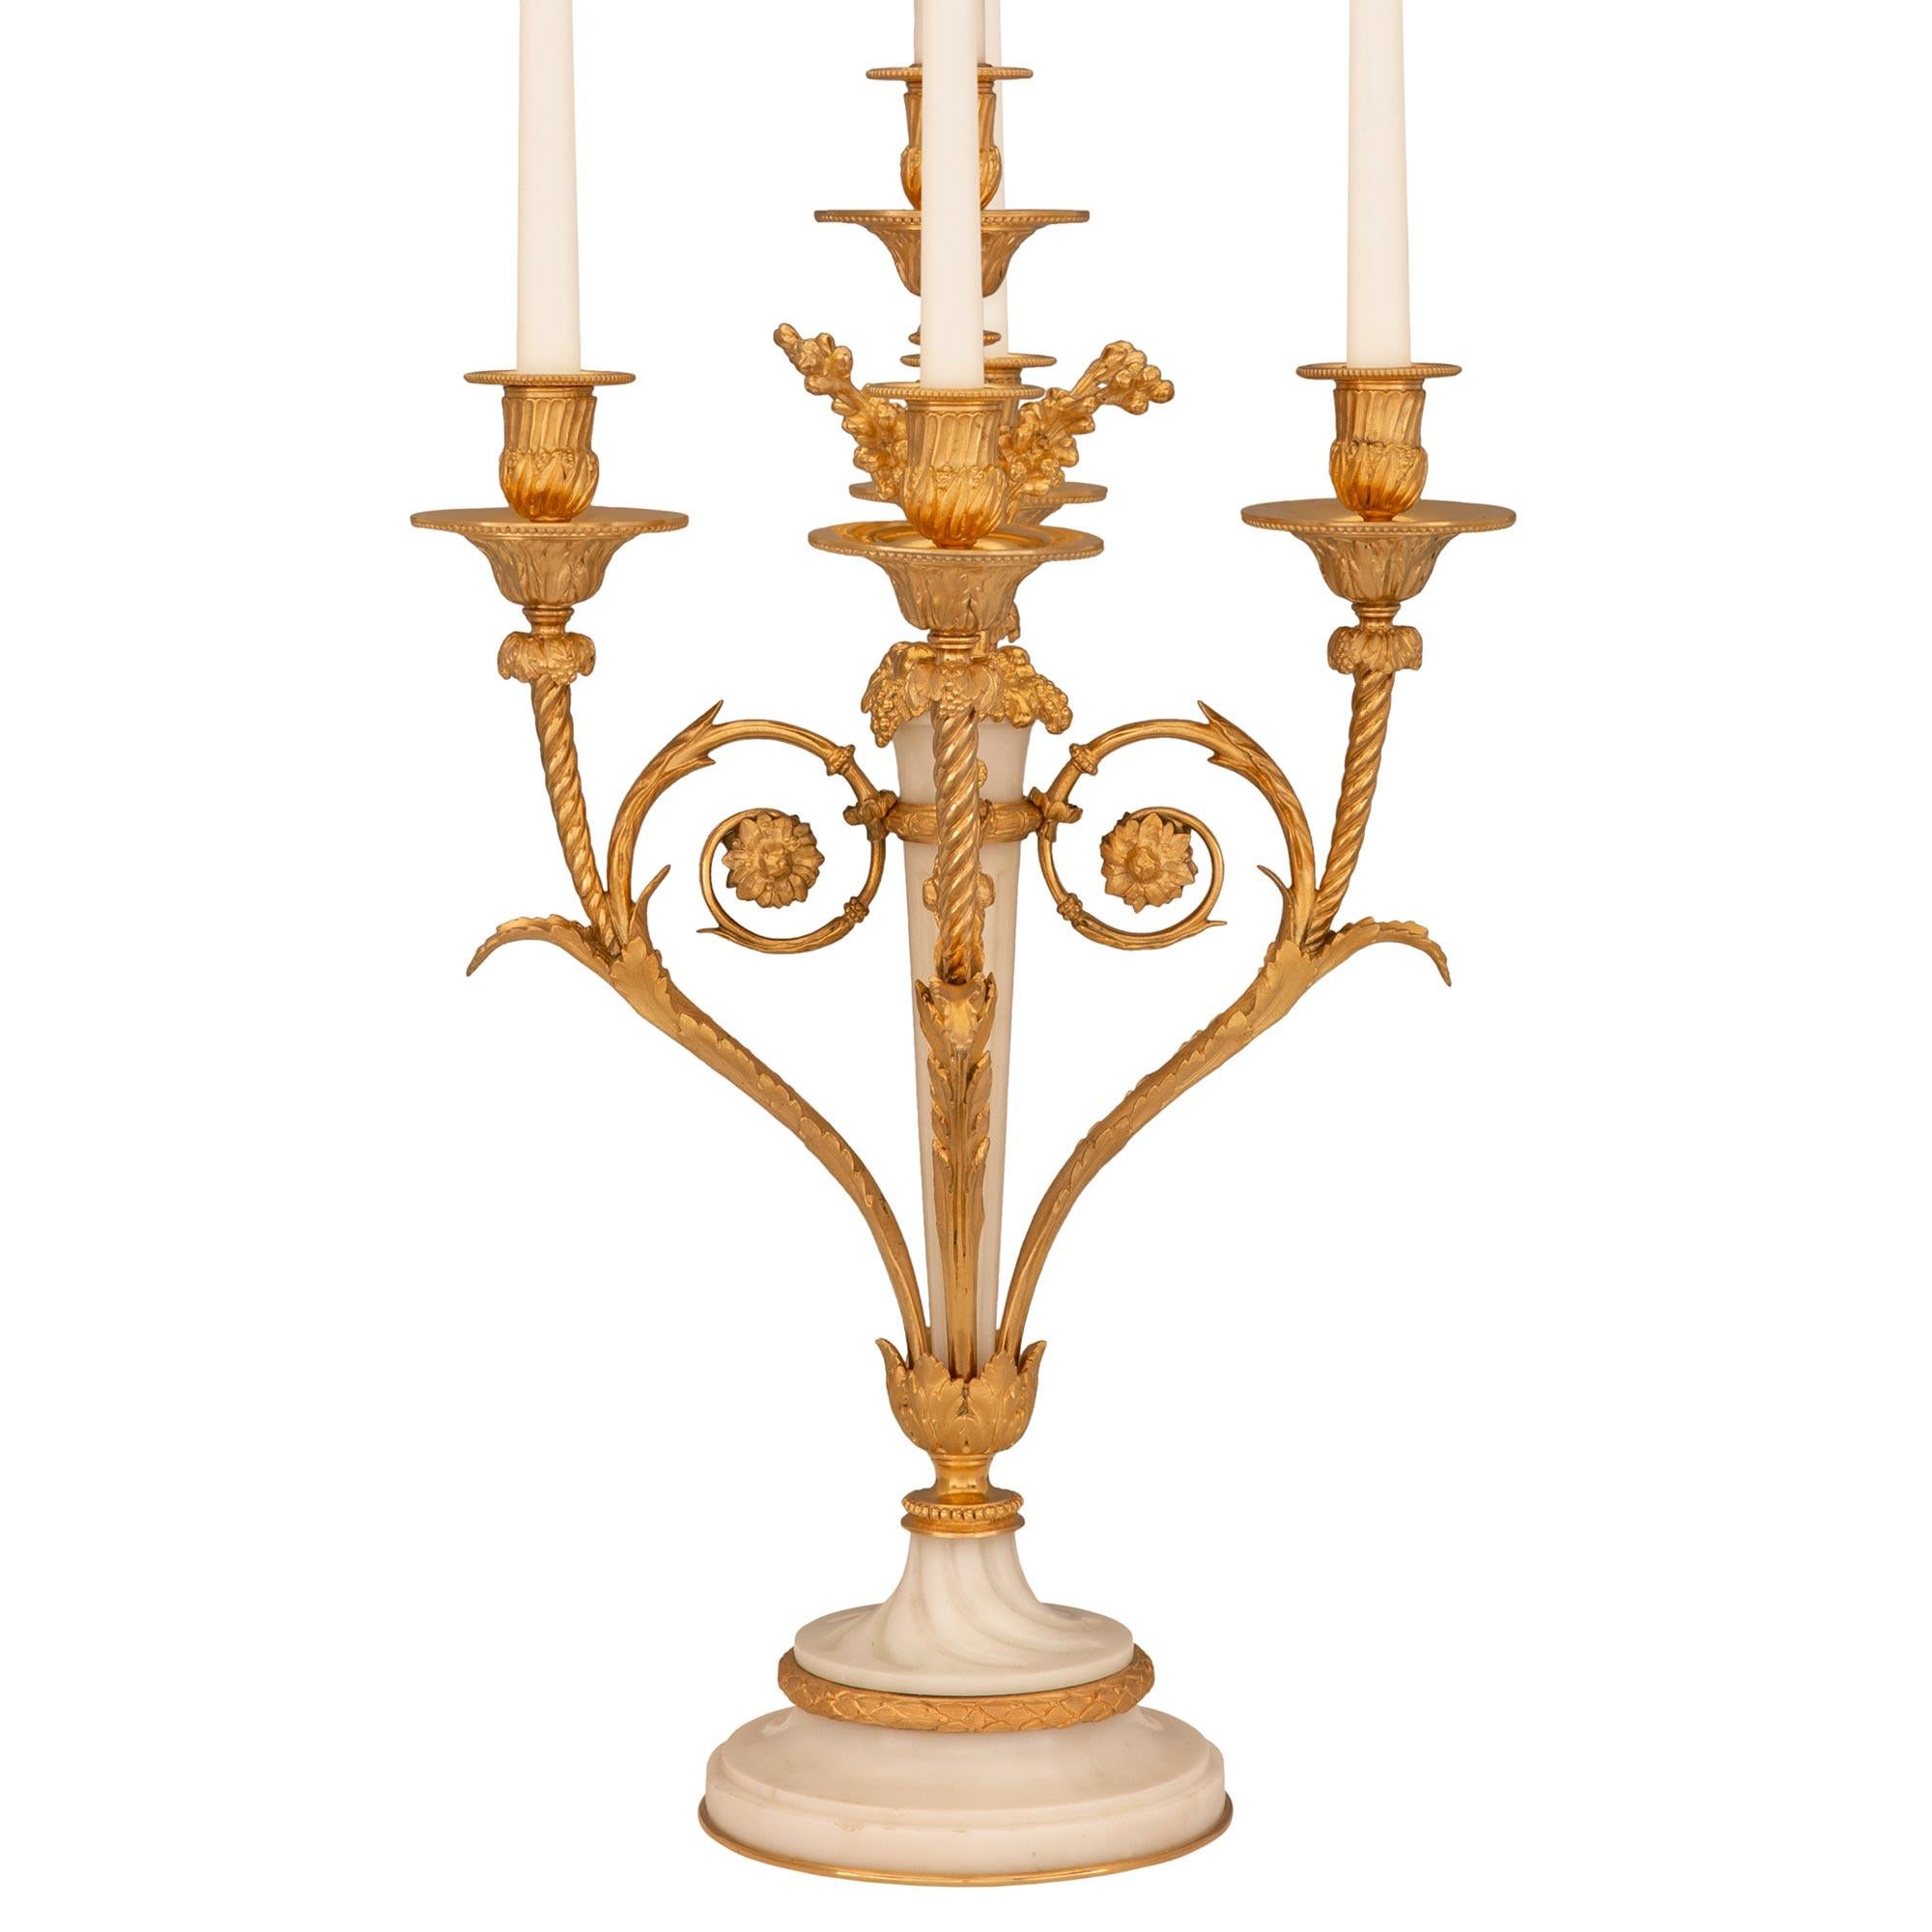 A striking and extremely decorative French 19th century Louis XVI st. Belle Époque period candelabra lamps after a model by Pierre Gouthière. Each four arm lamp is raised by an elegant circular white Carrara marble base with a fine bottom ormolu